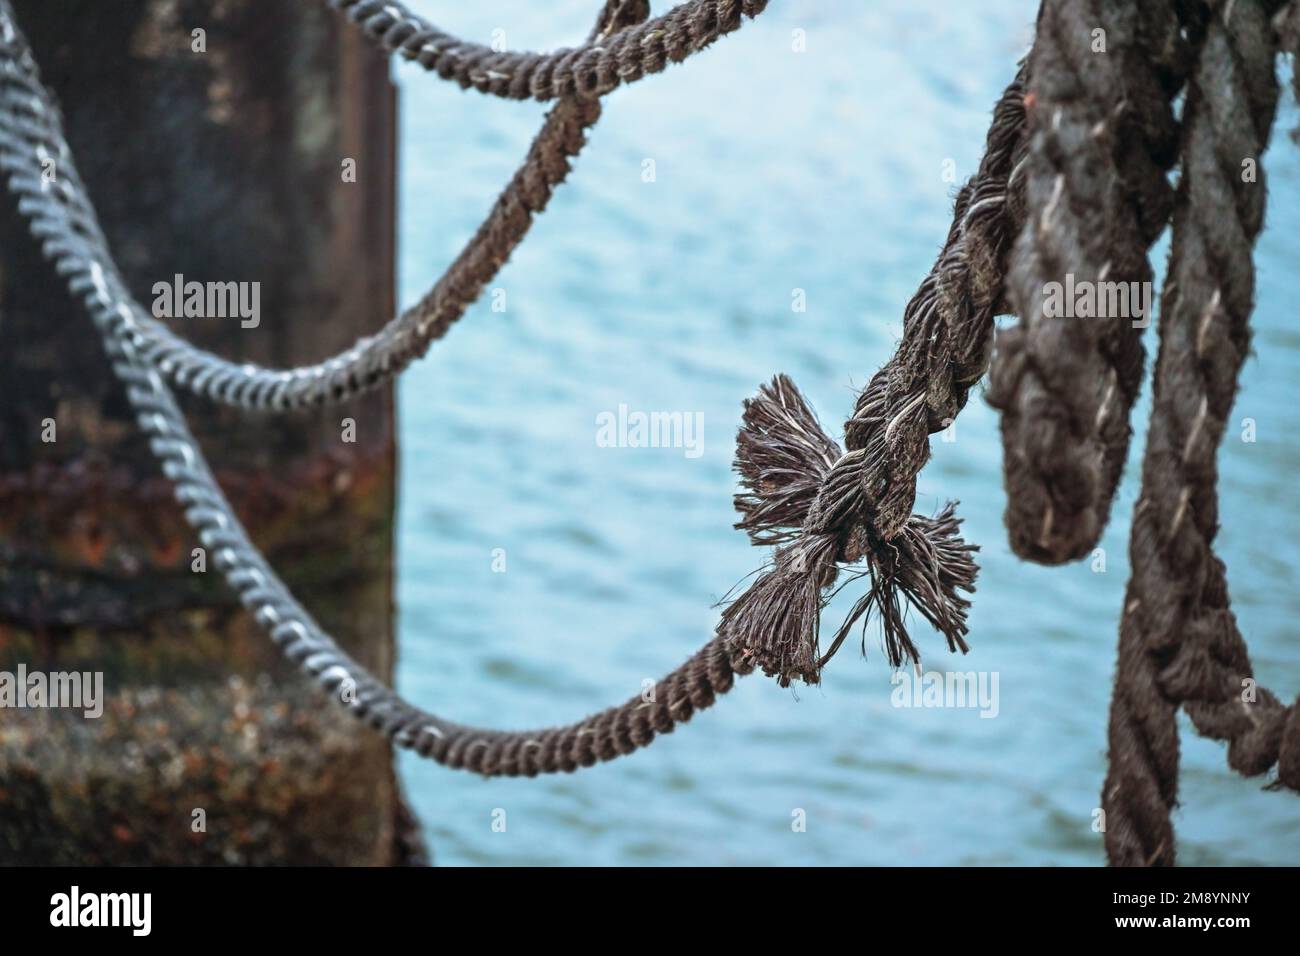 Knot on an old ship rope on a jetty over the water, metaphor for cohesion, copy space, selected focus, narrow depth of field Stock Photo